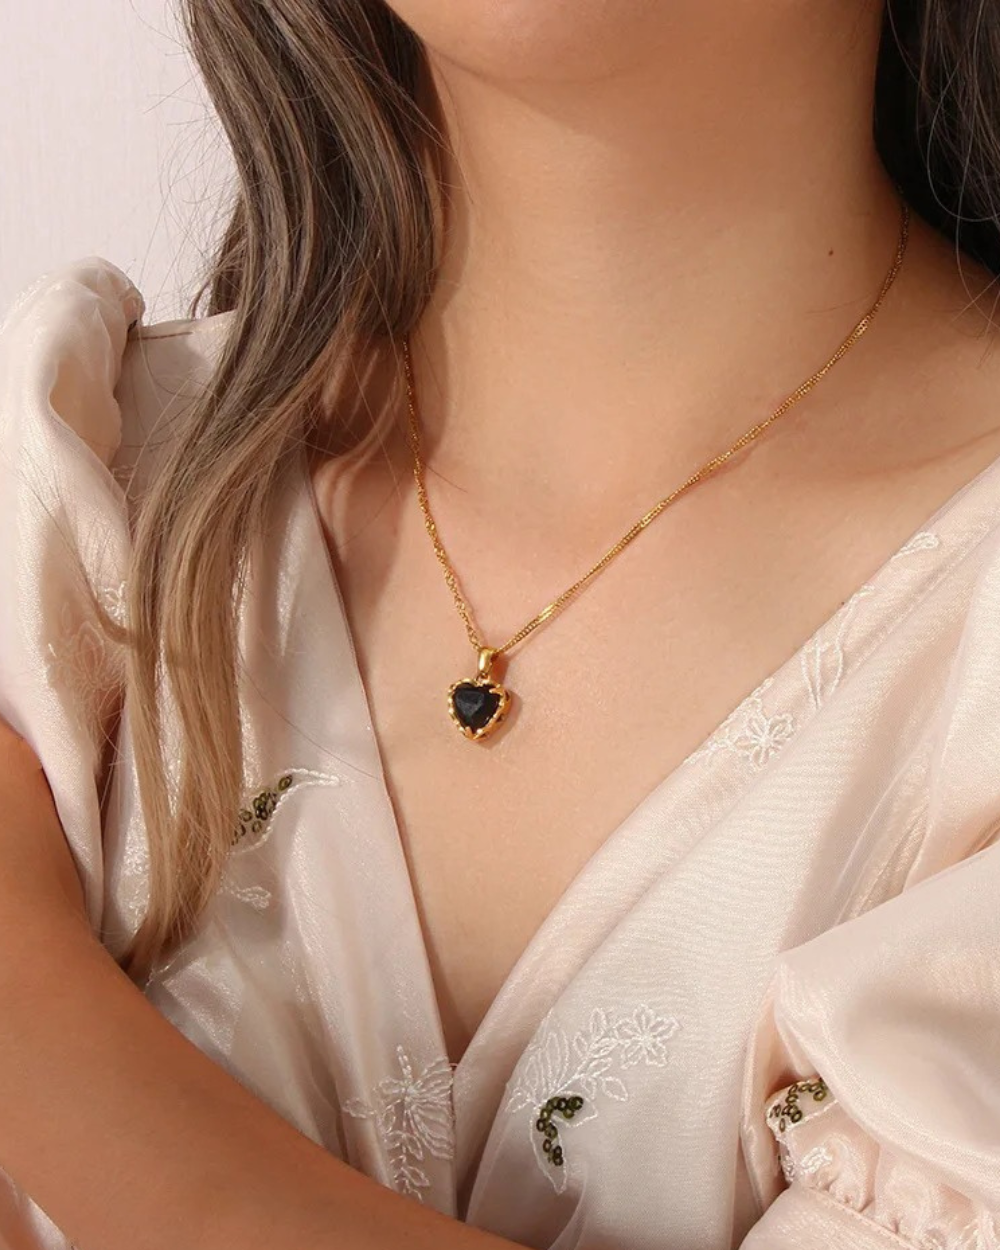 Cameron Black Stone Heart Shaped Pendant Twisted Chain Gold Necklace